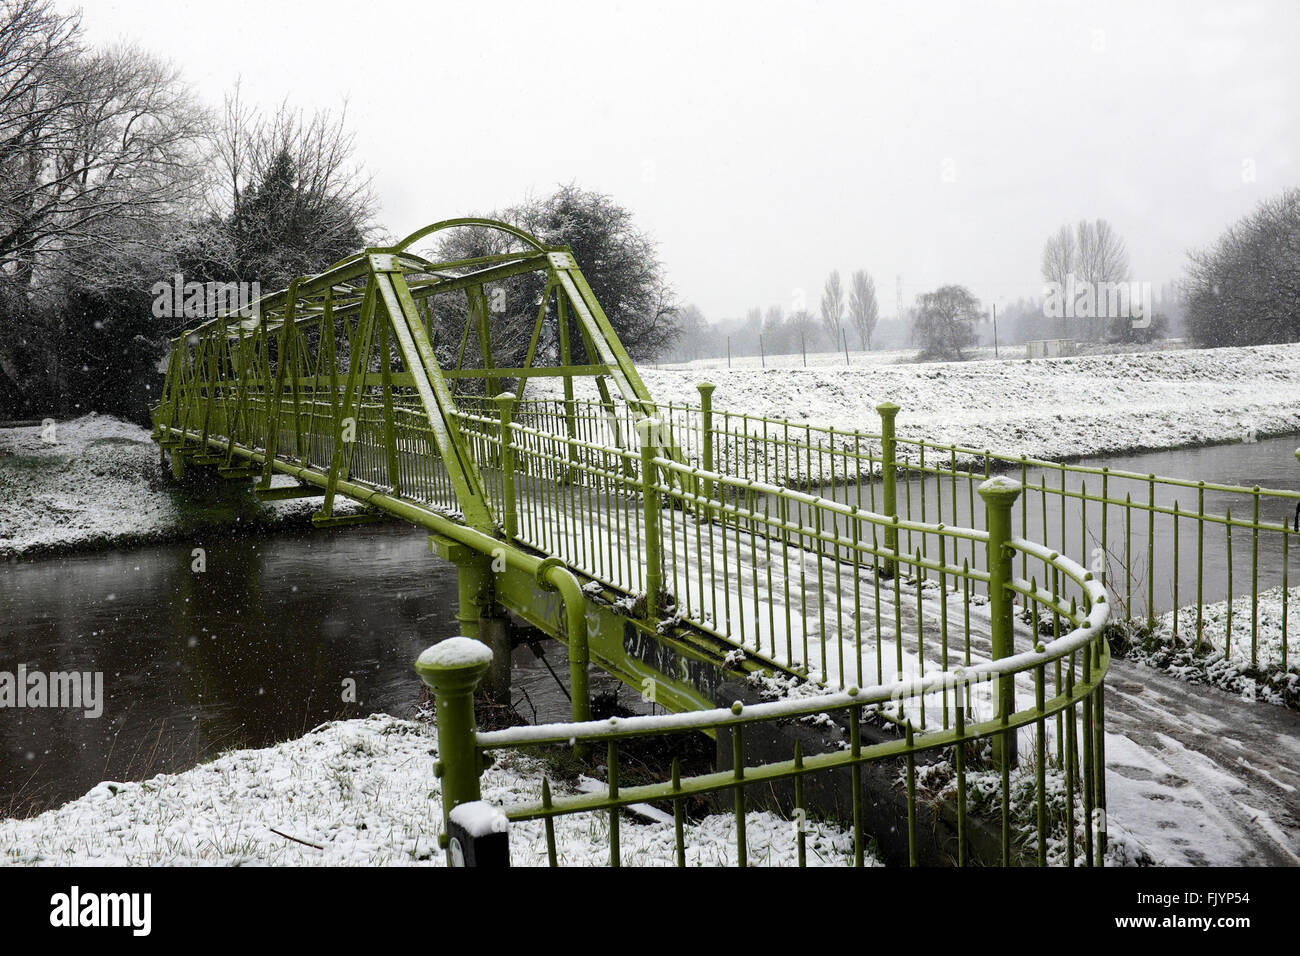 Manchester, UK. 4th March, 2016. Simon's Bridge linking Didsbury with Northenden  in South Manchester over the River Mersey has a covering of snow. Credit:  John Fryer/Alamy Live News Stock Photo